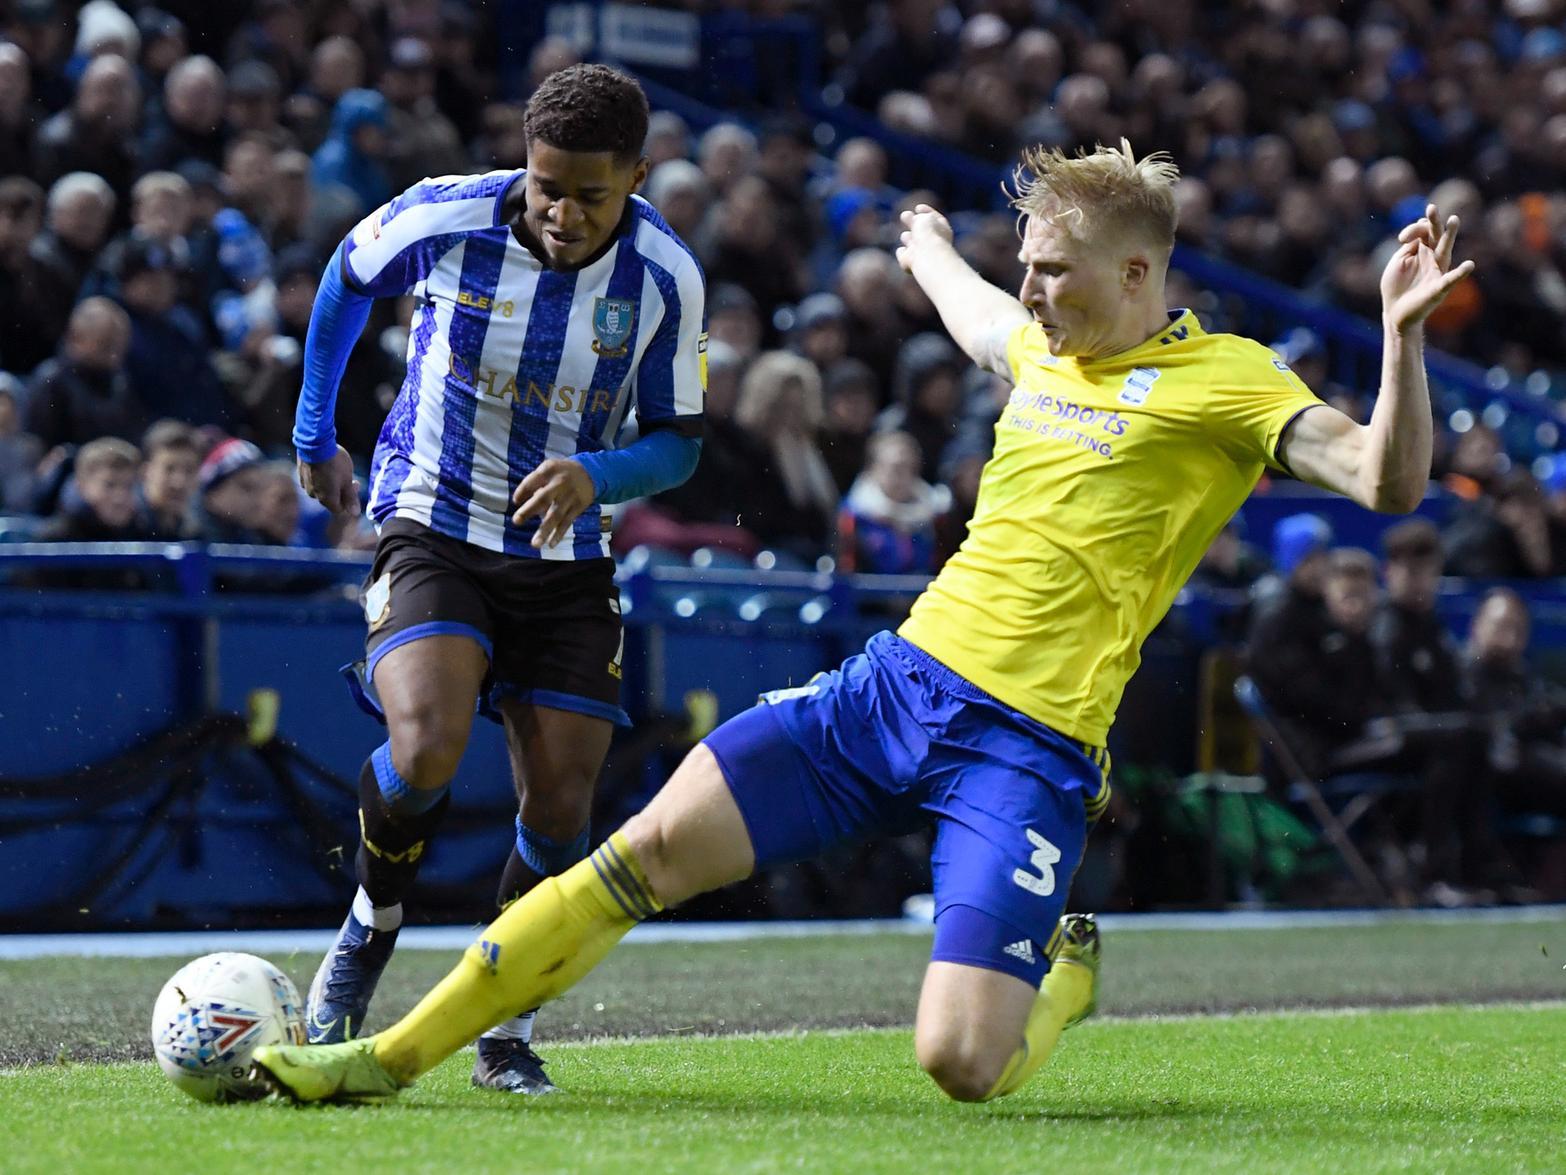 Sheffield Wednesday went into their game against Birmingham City on a dreadful run of conceding late goals, and while a 1-1 draw wasn't ideal, Harris' composure to score in the final ten minutes is a positive step forward.